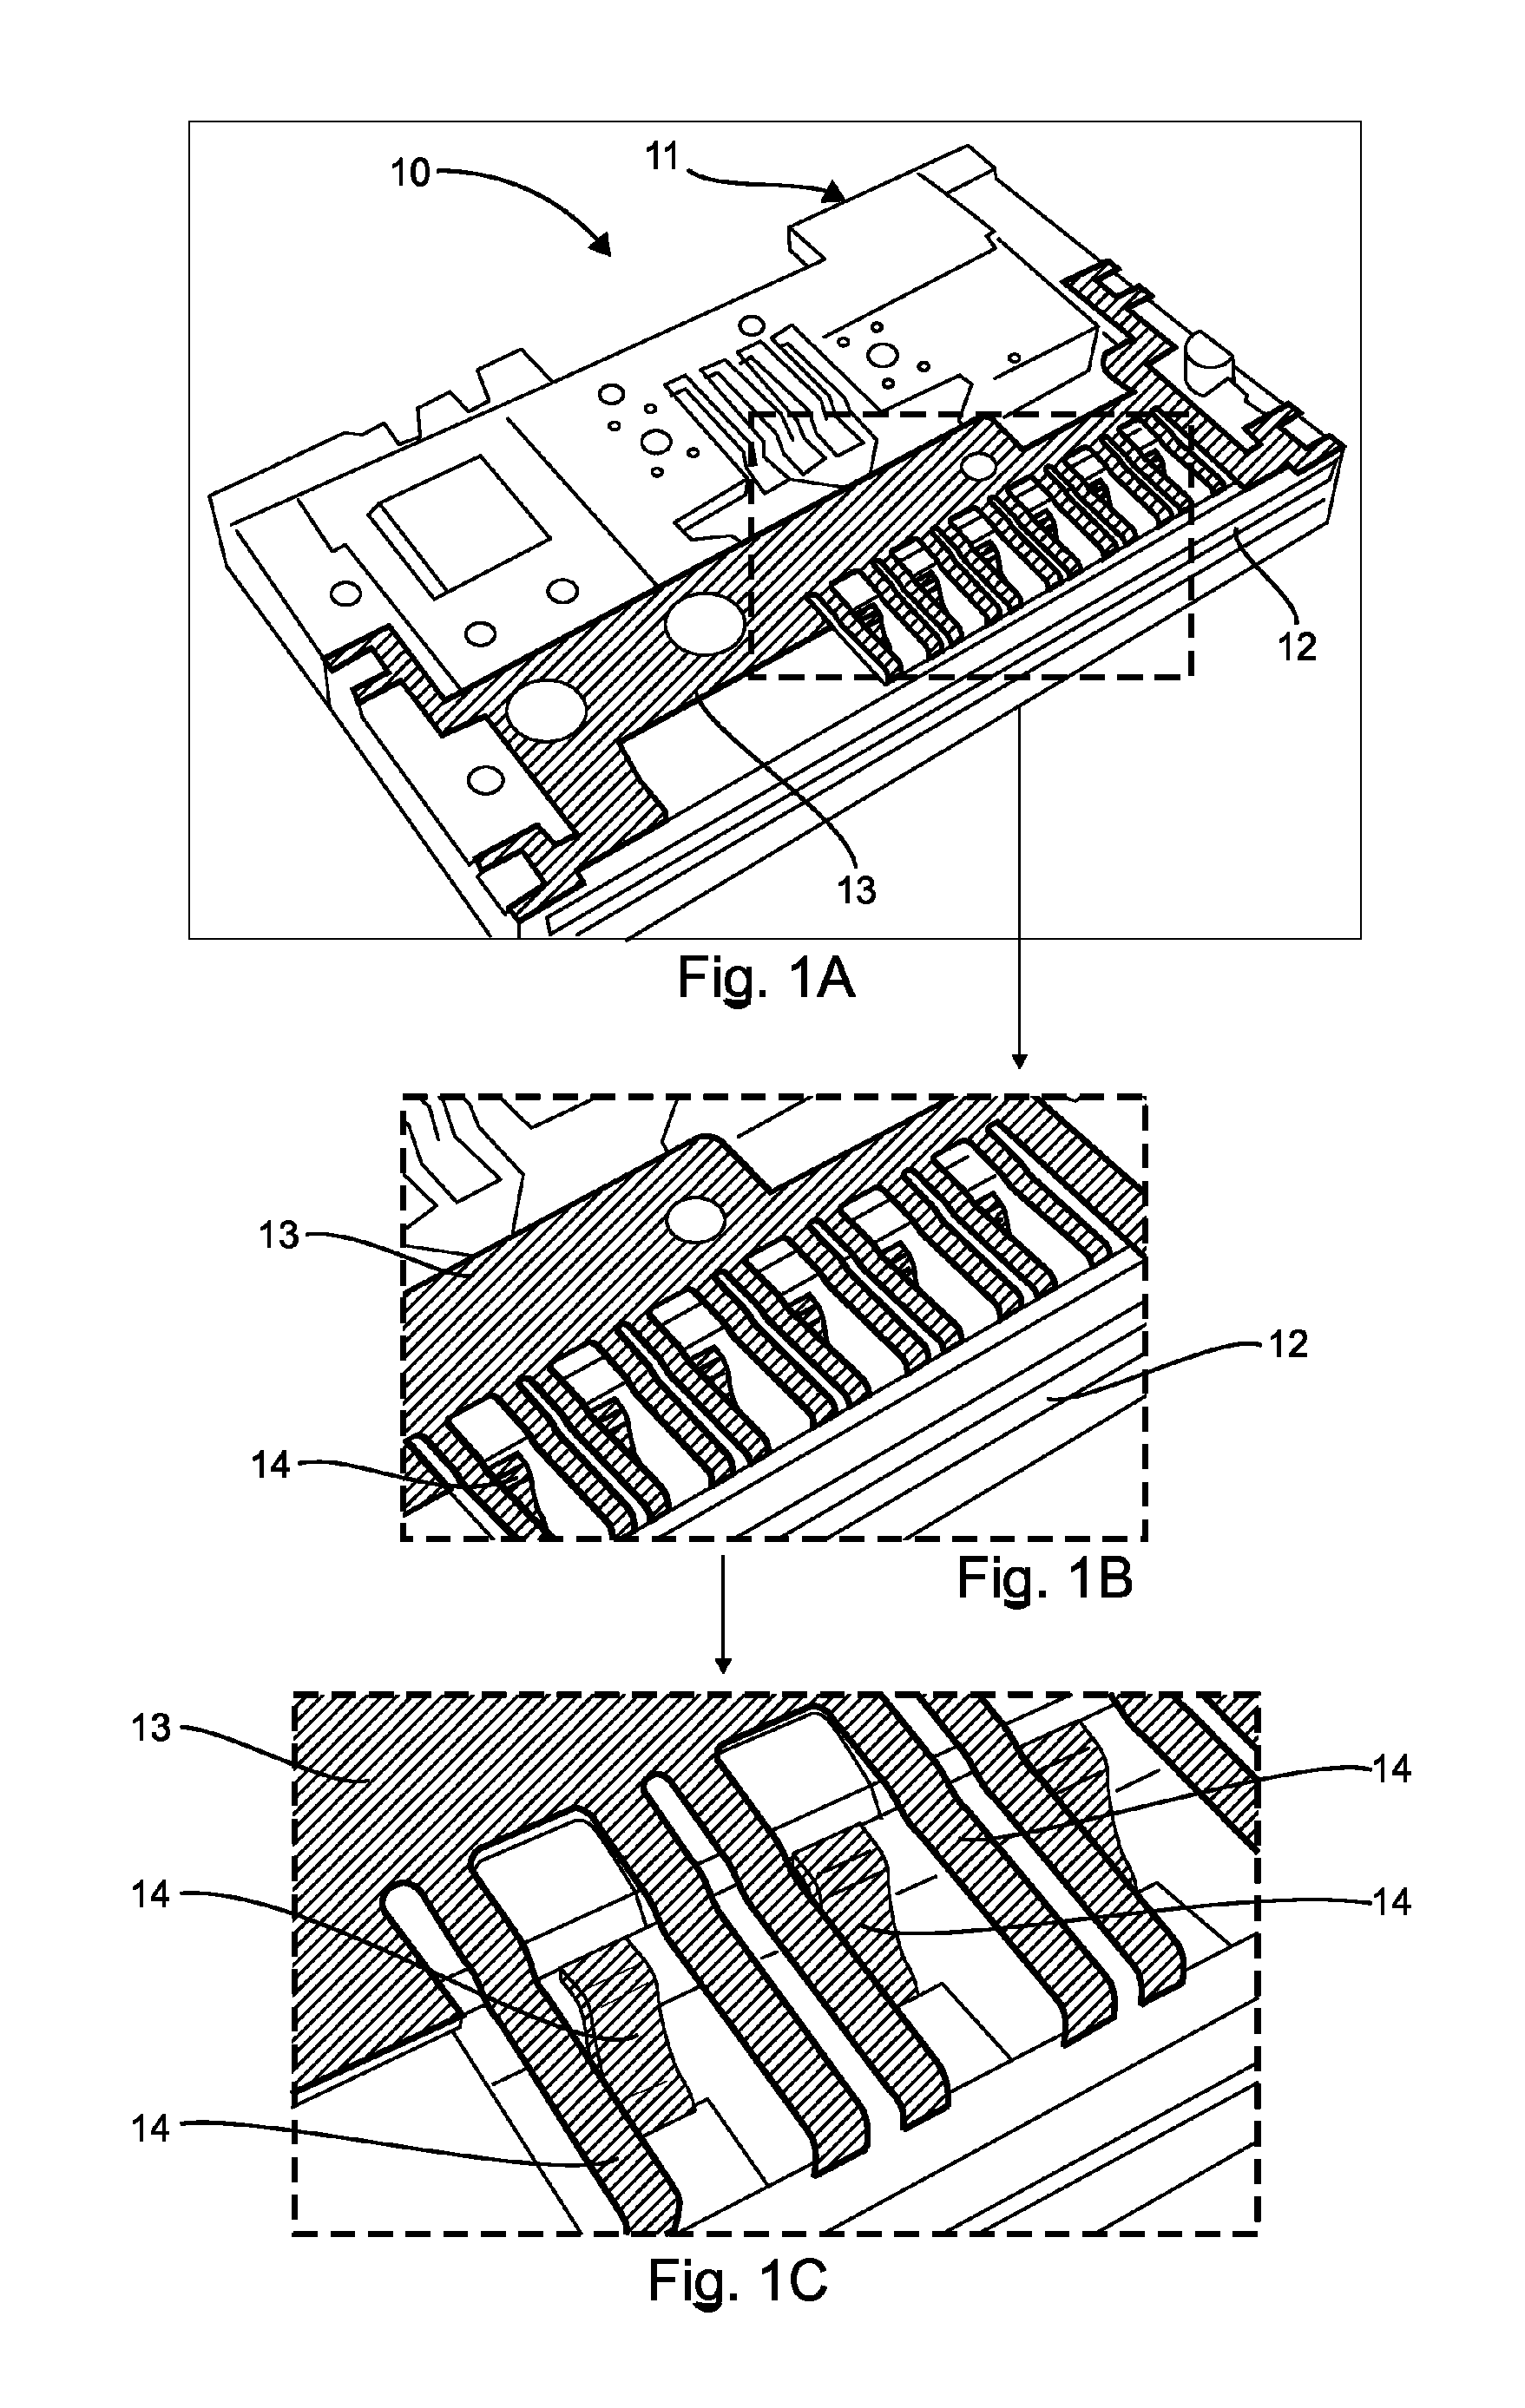 Memory card connector having several conductive plastic parts with different values of resistance for discharging static electricity